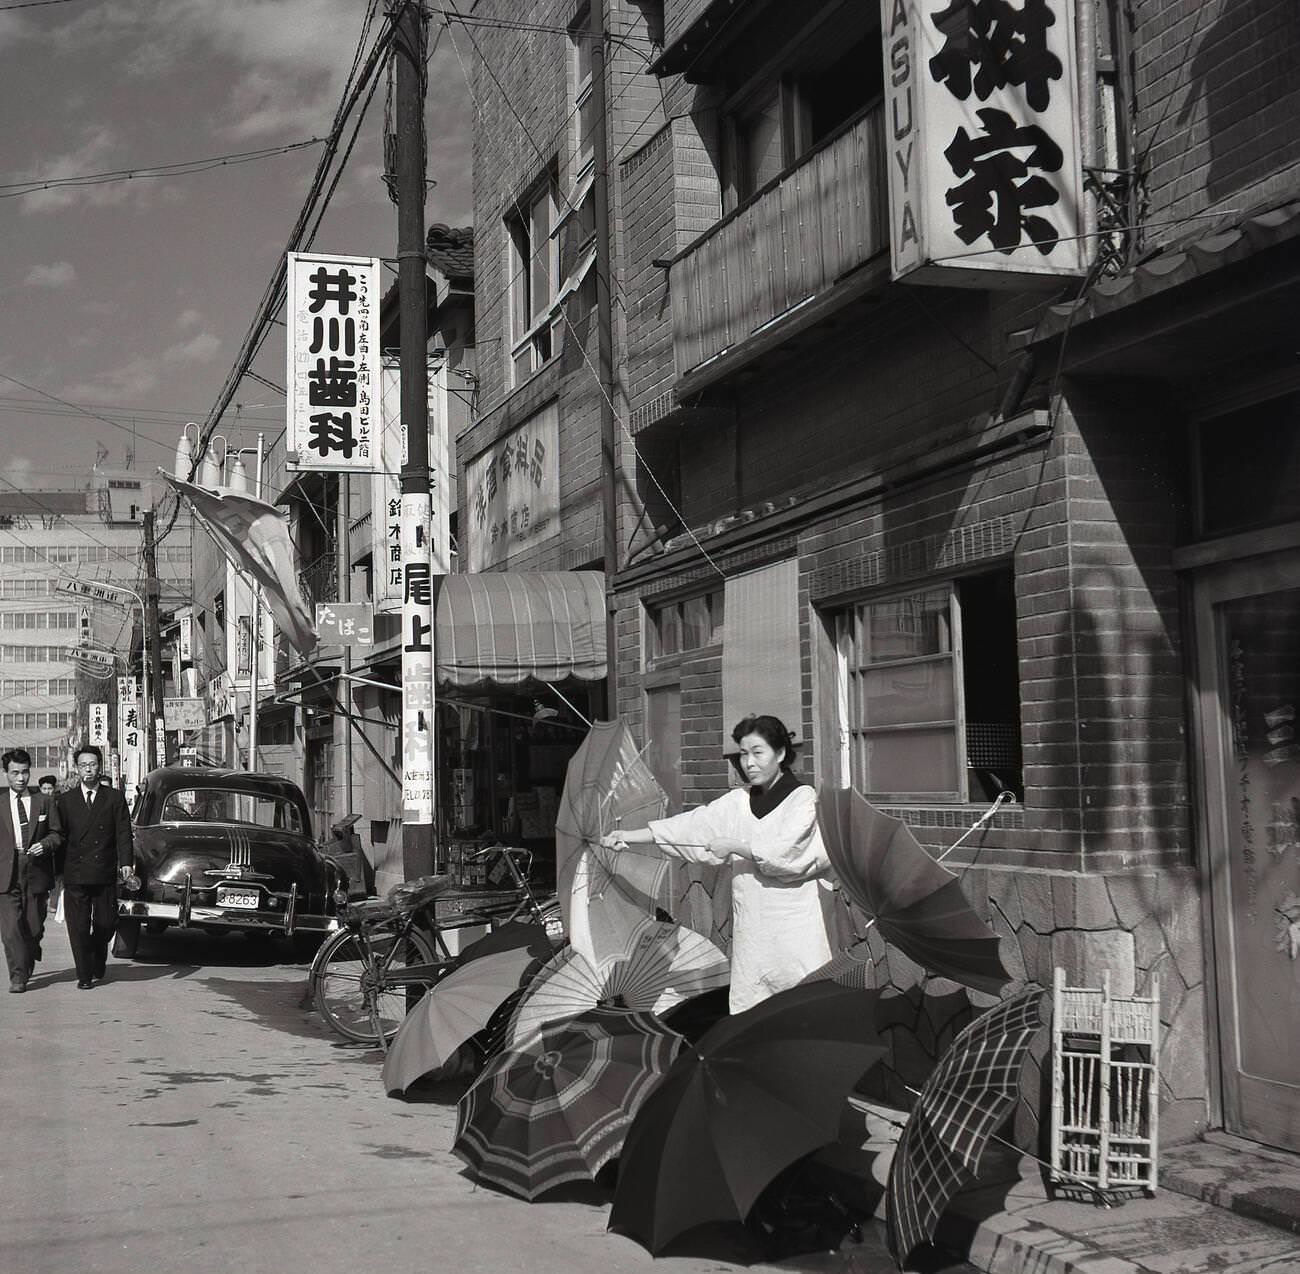 A female Japanese street trader outside a building in the old town selling umbrellas in Tokyo, 1950s.